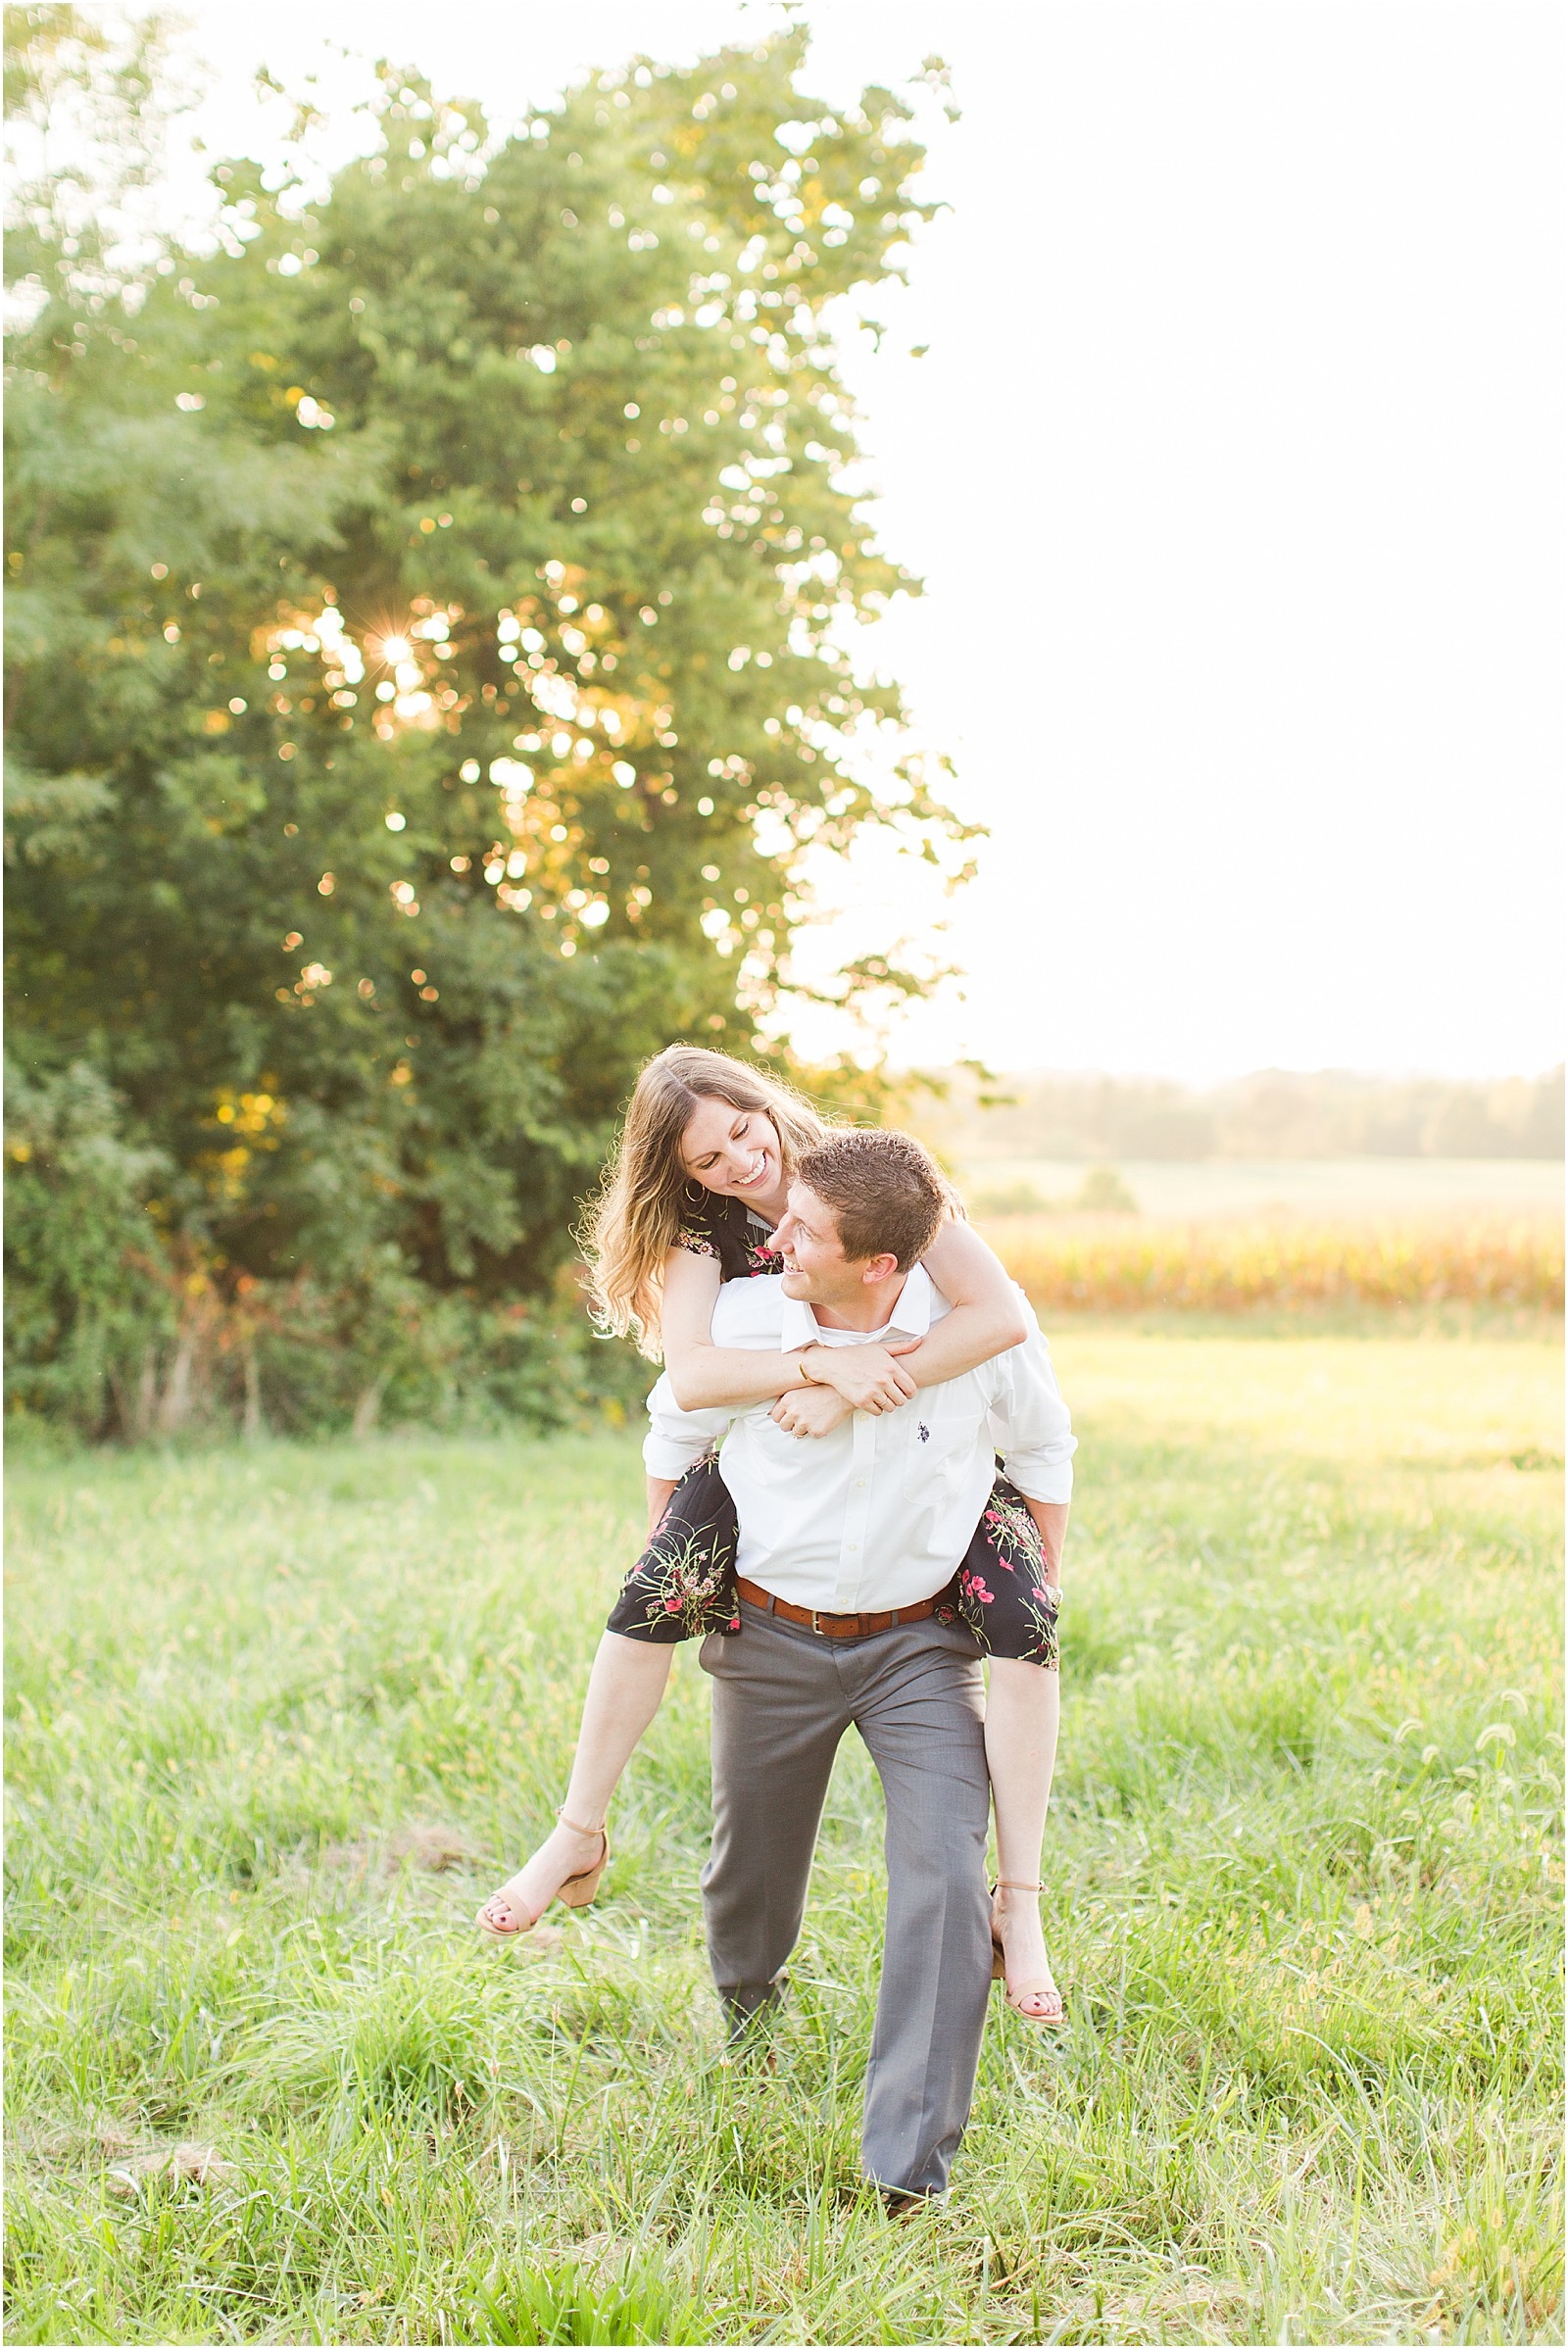 A Jasper Indiana Engagement Session | Tori and Kyle | Bret and Brandie Photography033.jpg